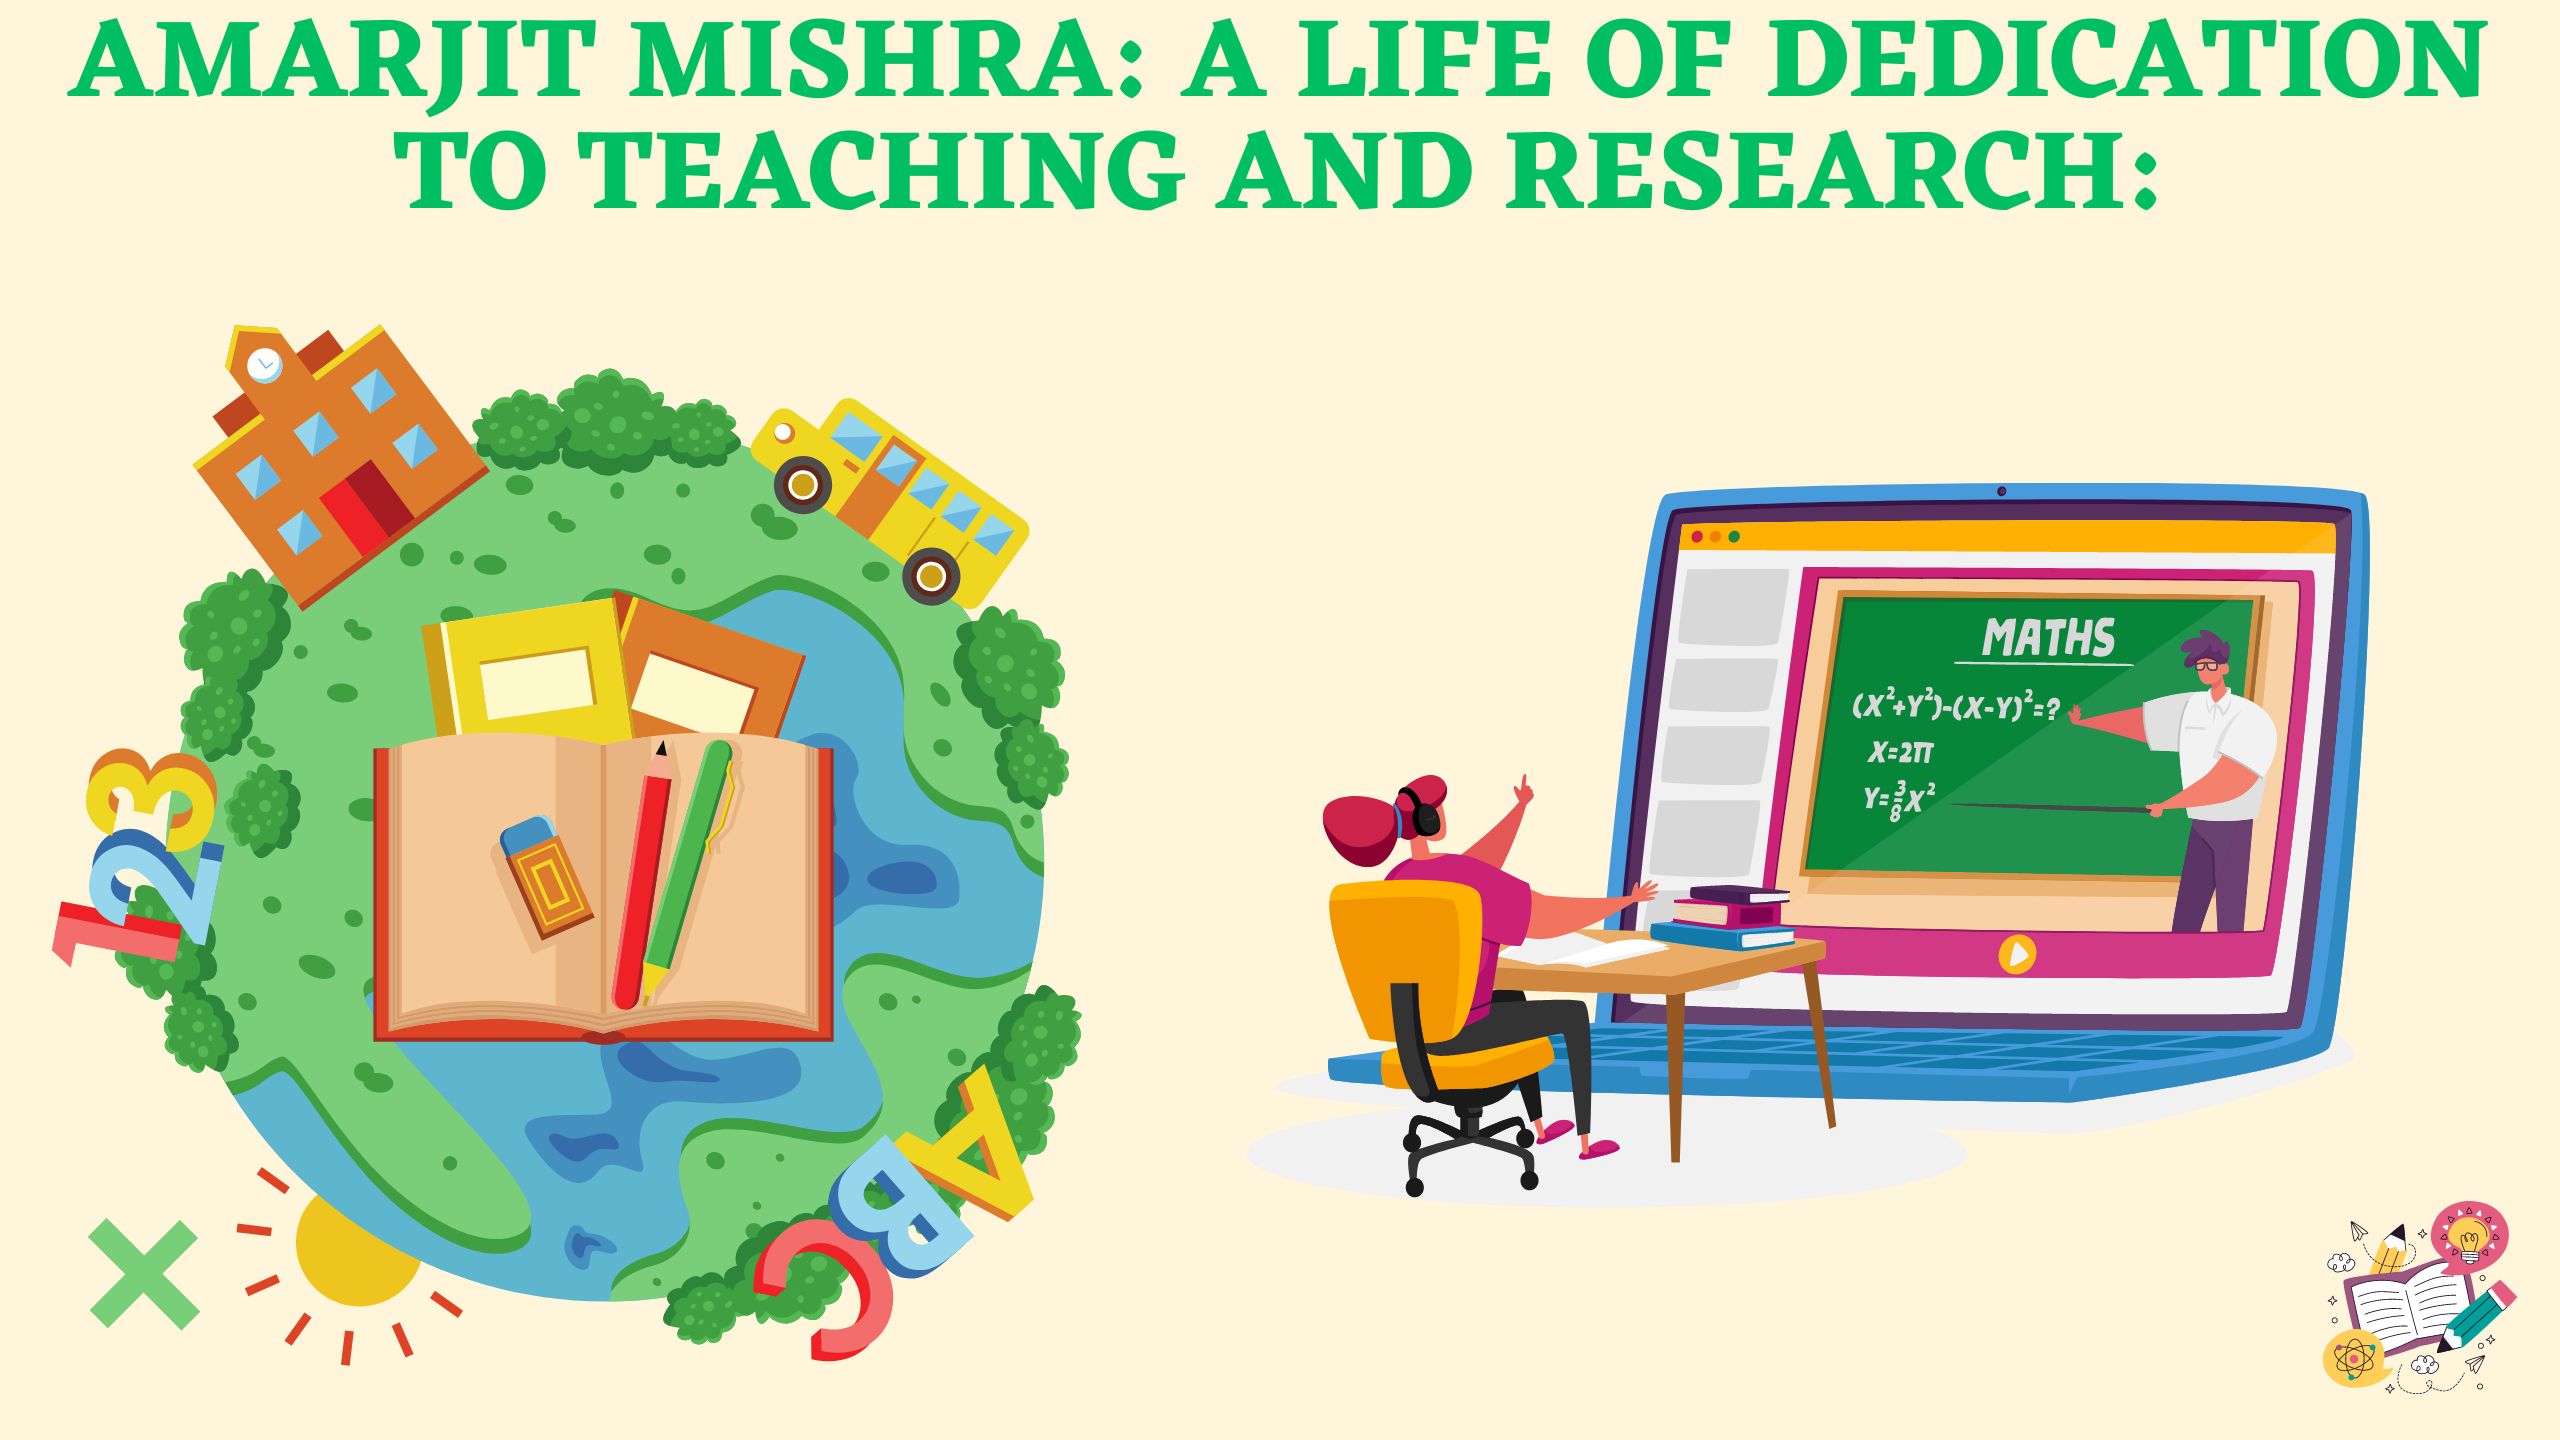 Amarjit Mishra A Life of Dedication to Teaching and Research